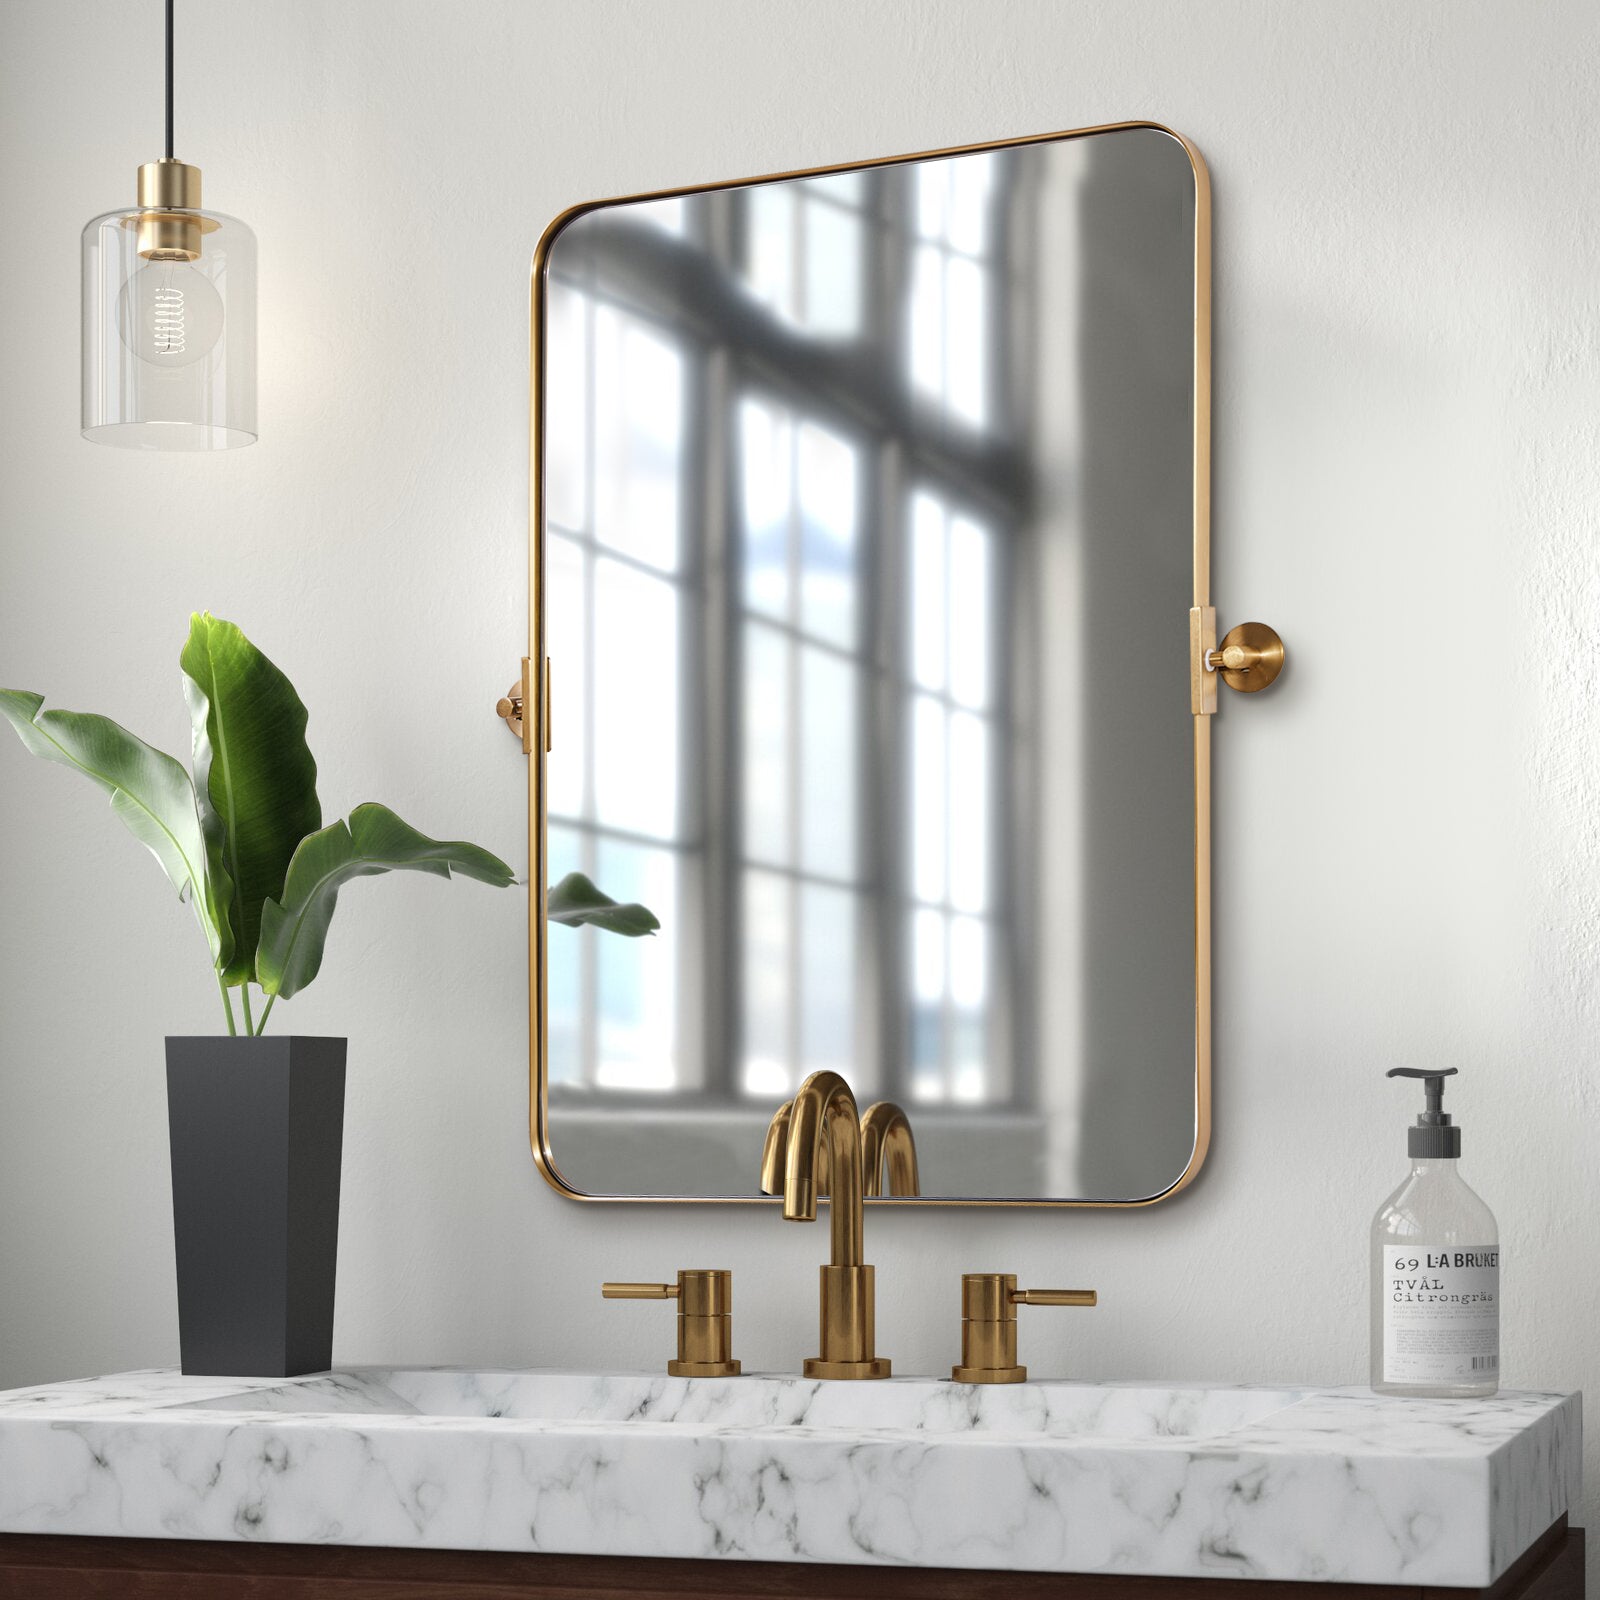 Modern Tilting Pivot Mirror for Bathroom Vanity Rounded Rectangle Mirror Adjustable Swivel Wall Mirror| Stainless Steel Frame Mounted Vertically#color_brushed gold